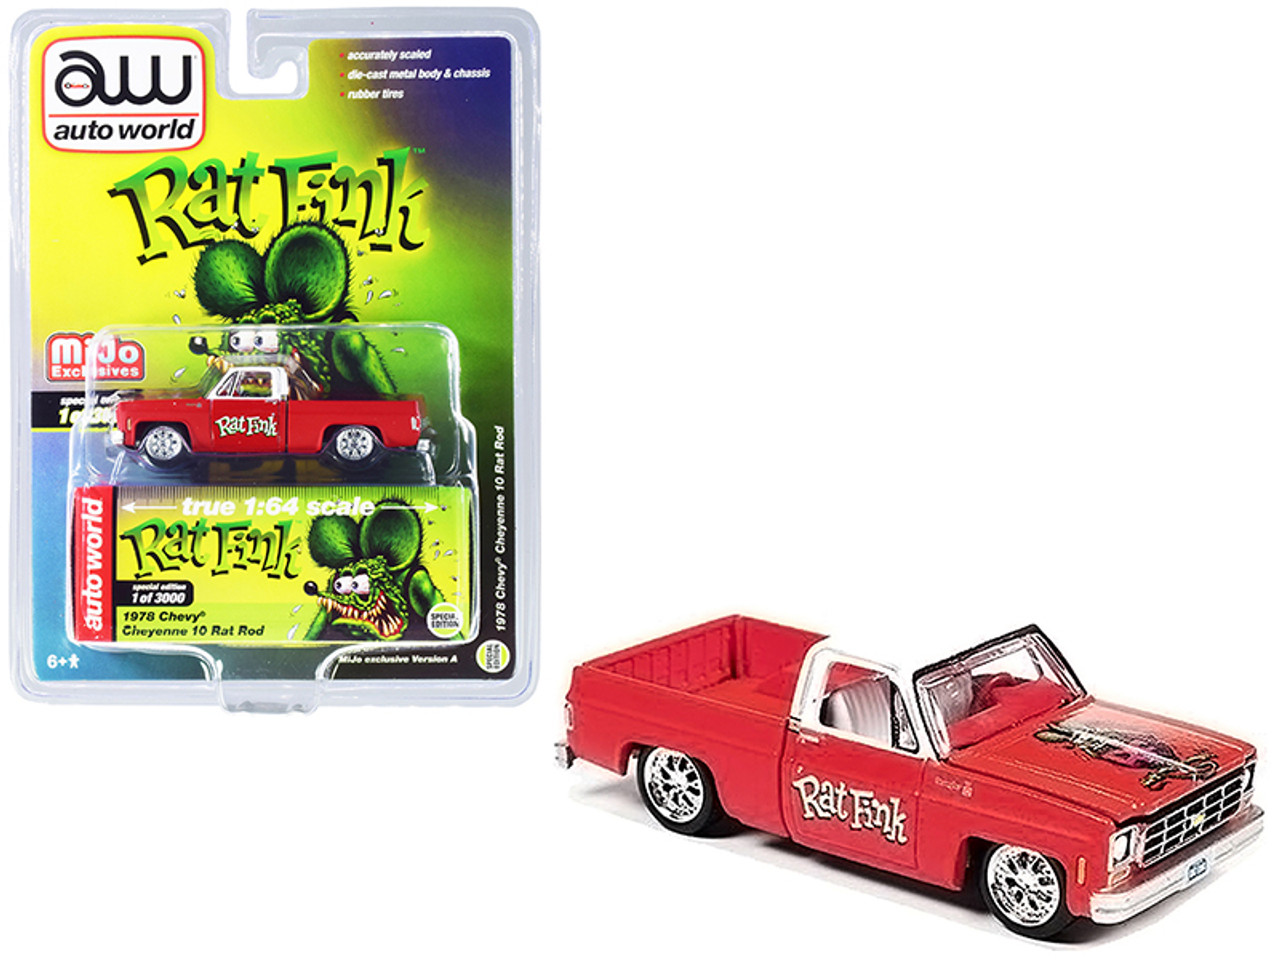 1978 Chevrolet Cheyenne 10 Rat Rod Pickup Truck Matt Red with White Top "Rat Fink" Limited Edition to 3000 pieces Worldwide 1/64 Diecast Model Car by Autoworld